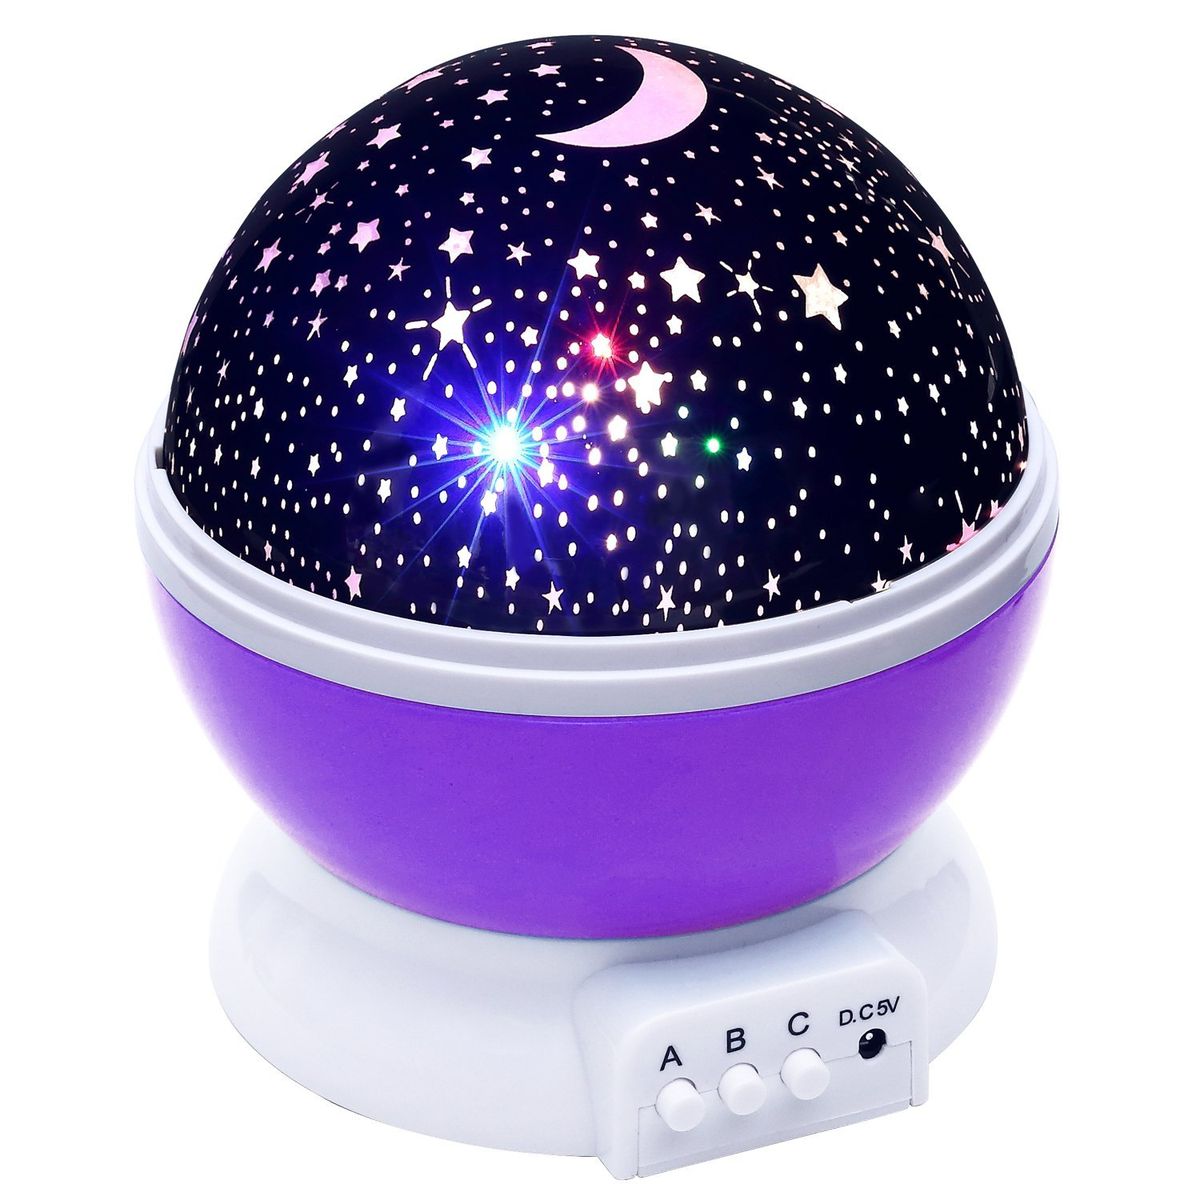 Star Master Night Light - Purple | Buy Online in South Africa